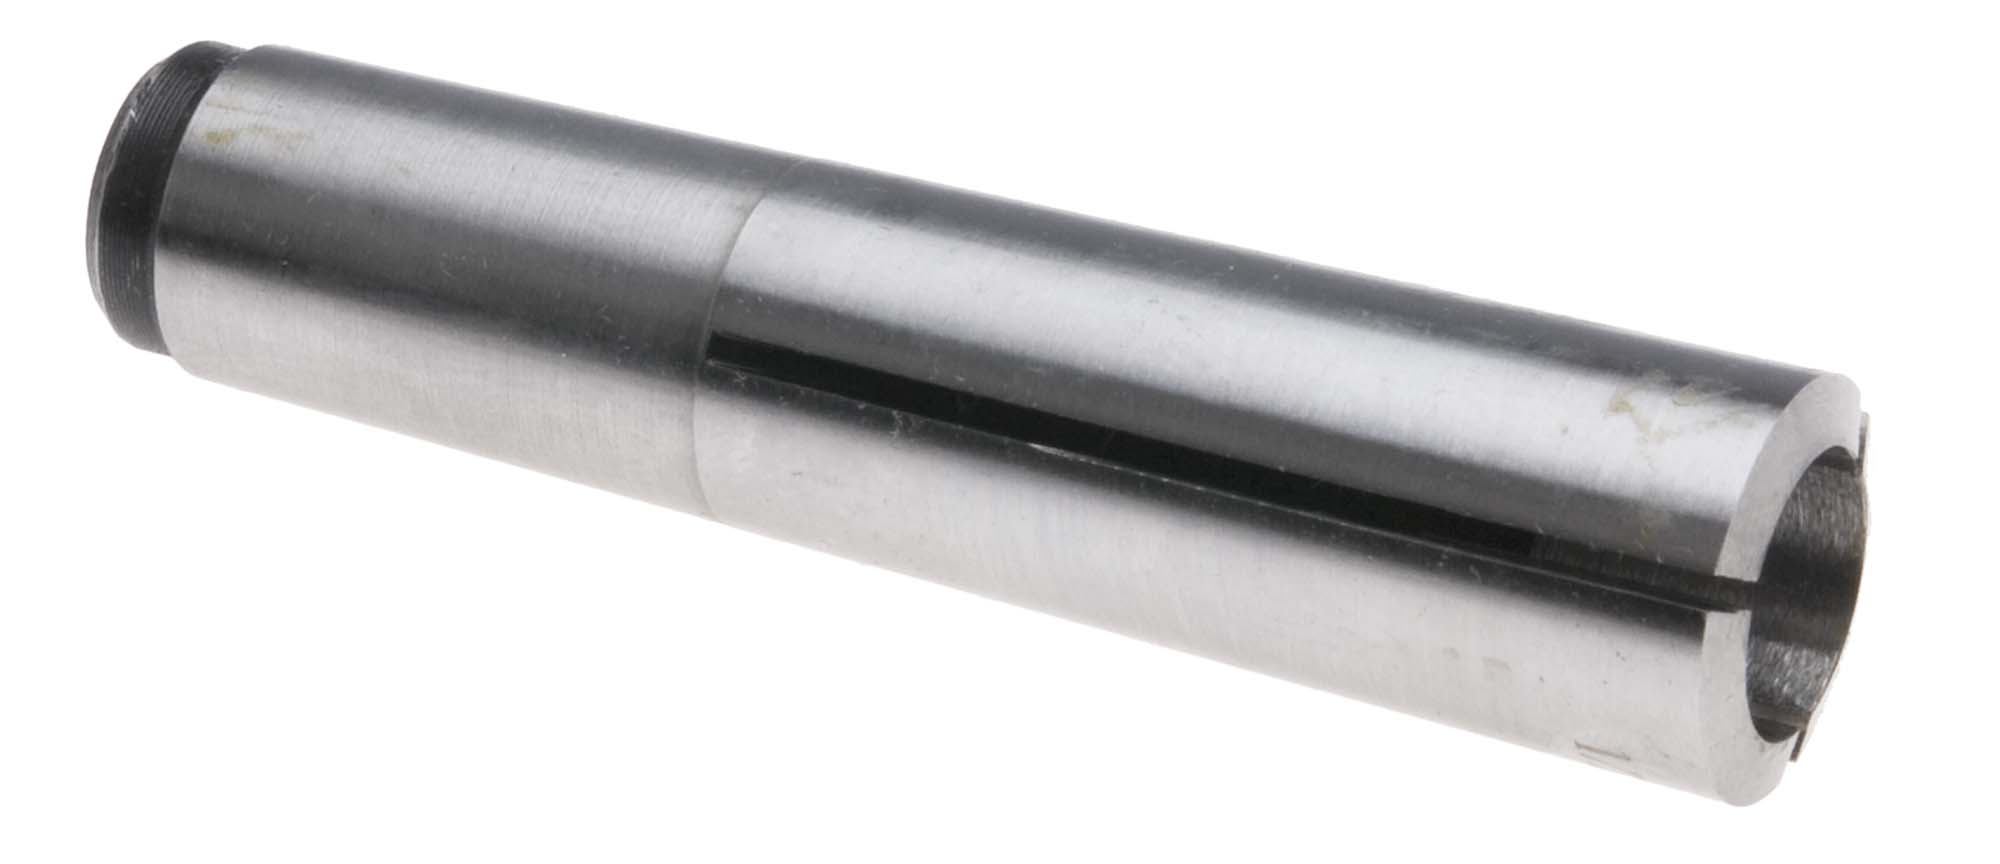 5/16" 7 B and S Taper Collet